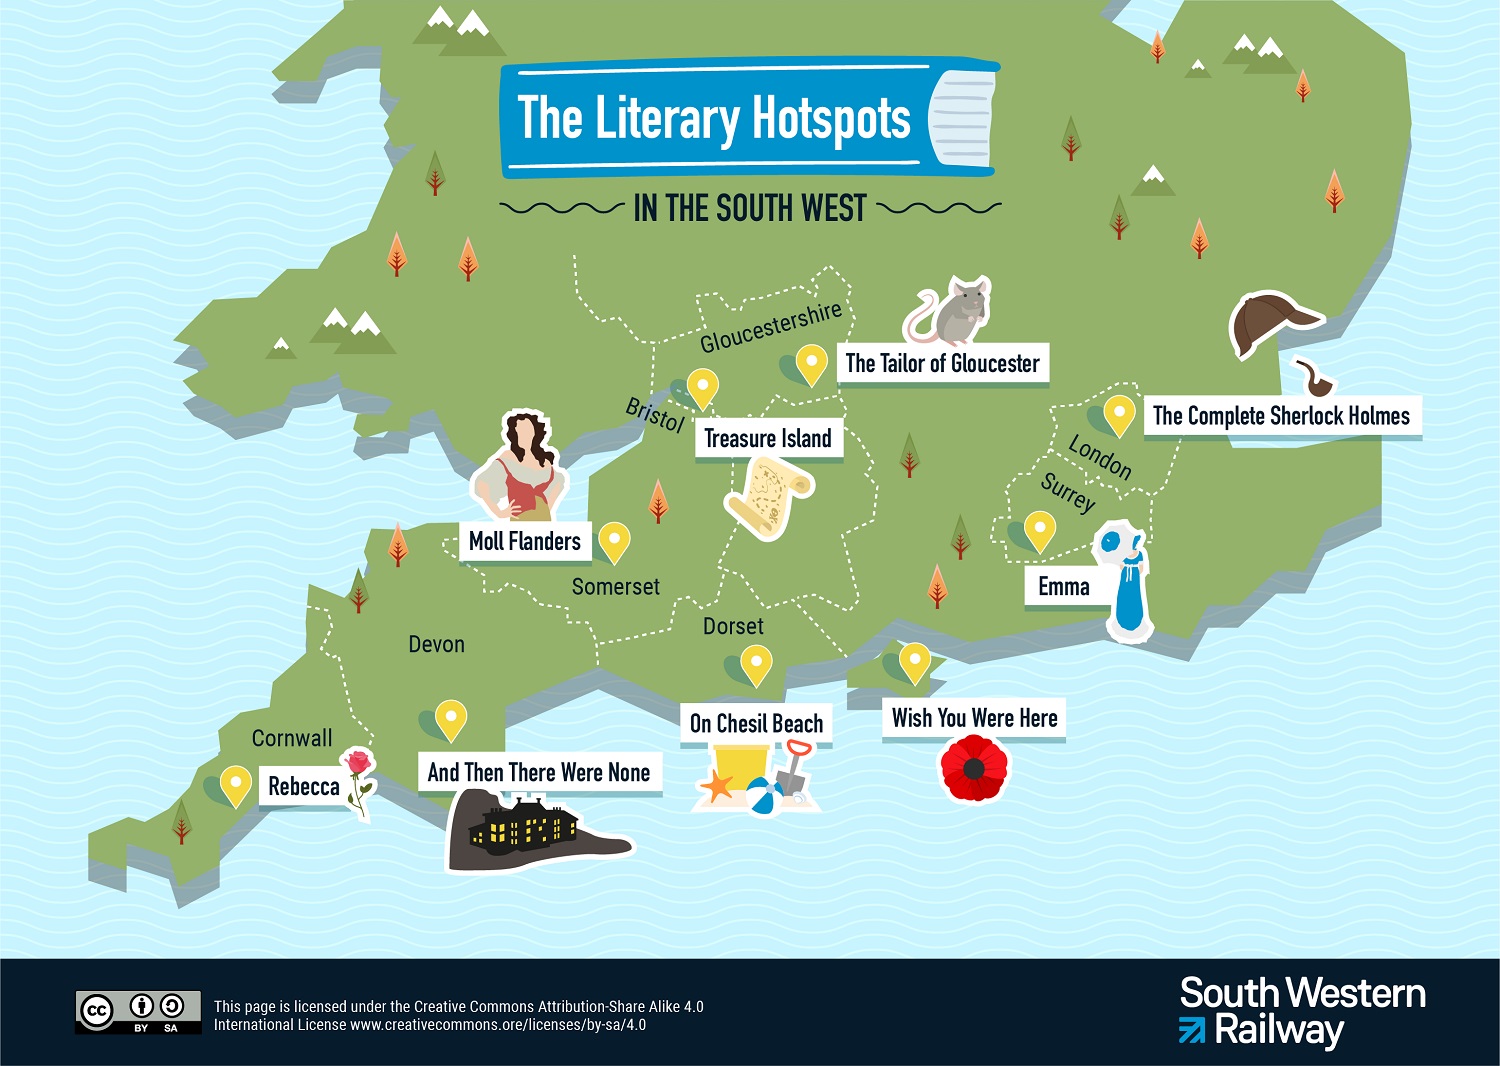 Discover the literary hotspots of the south west with SWR